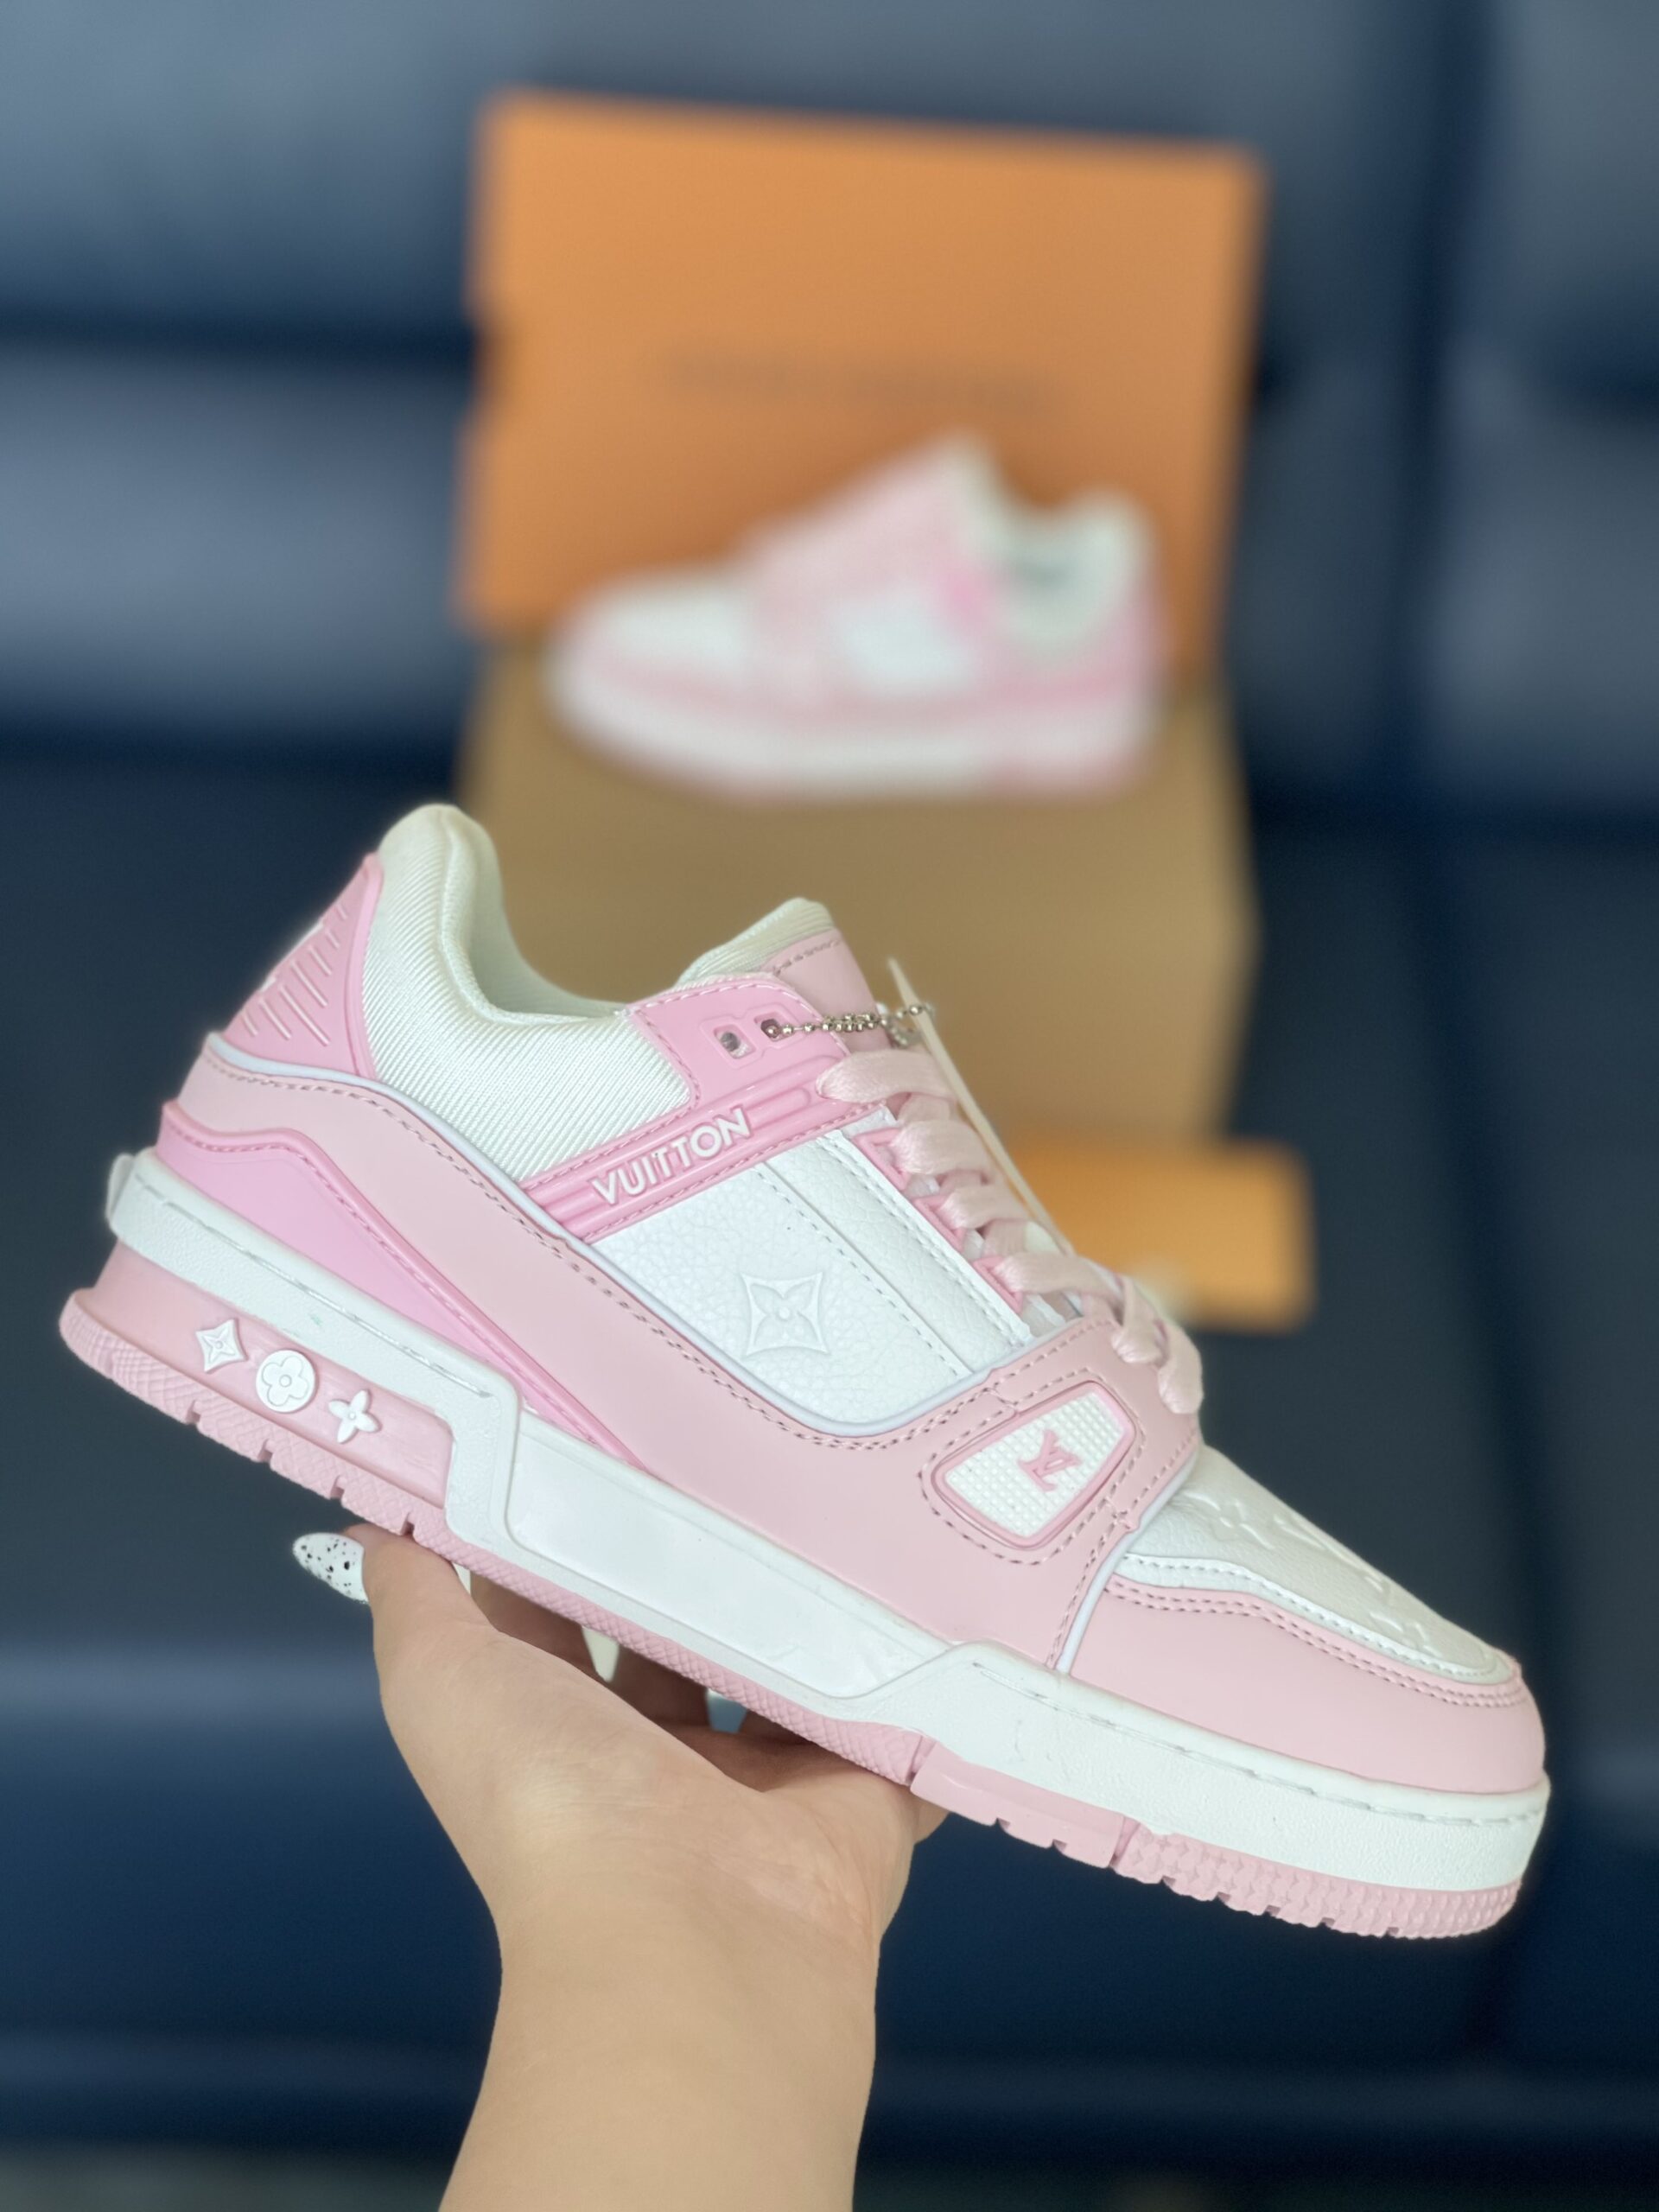 Giày Louis Vuitton LV Trainer Hồng Pink Rep 1:1